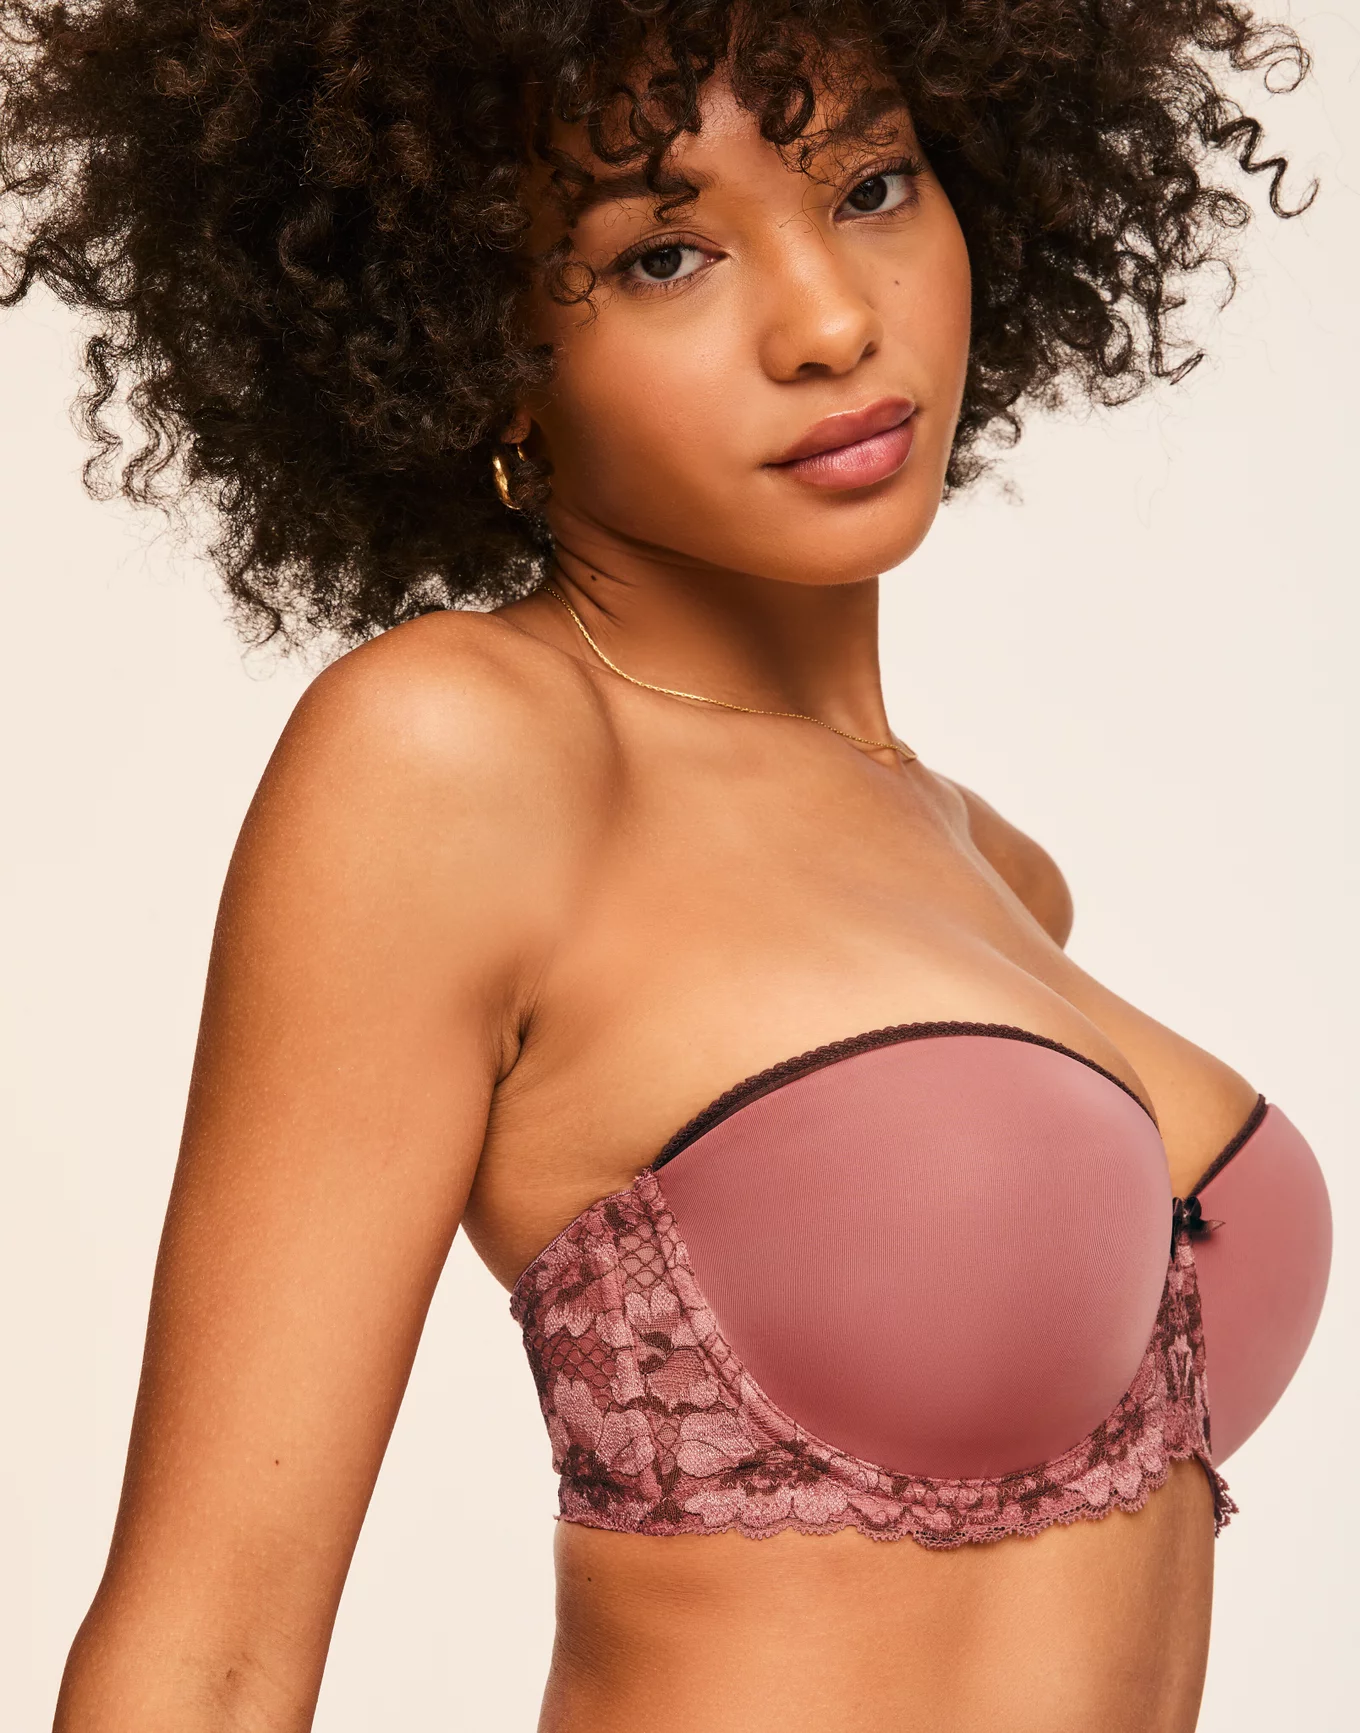 French Lace Corset And Push-up Bra Set - Hourglass Perfection